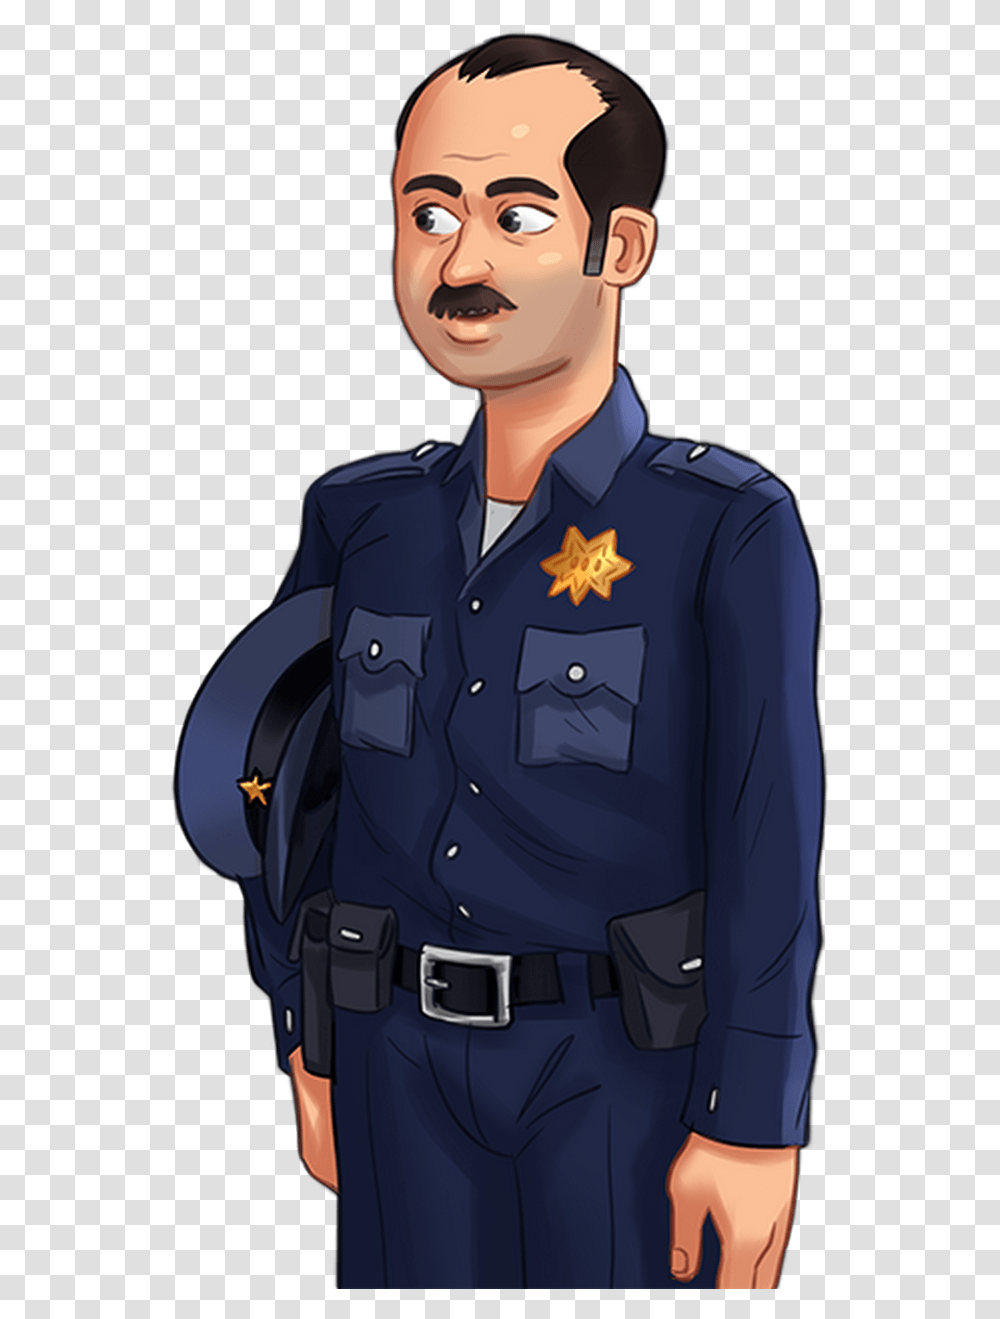 Filessharoldpng Hgames Wiki Police Officer, Military Uniform, Person, Human, Guard Transparent Png